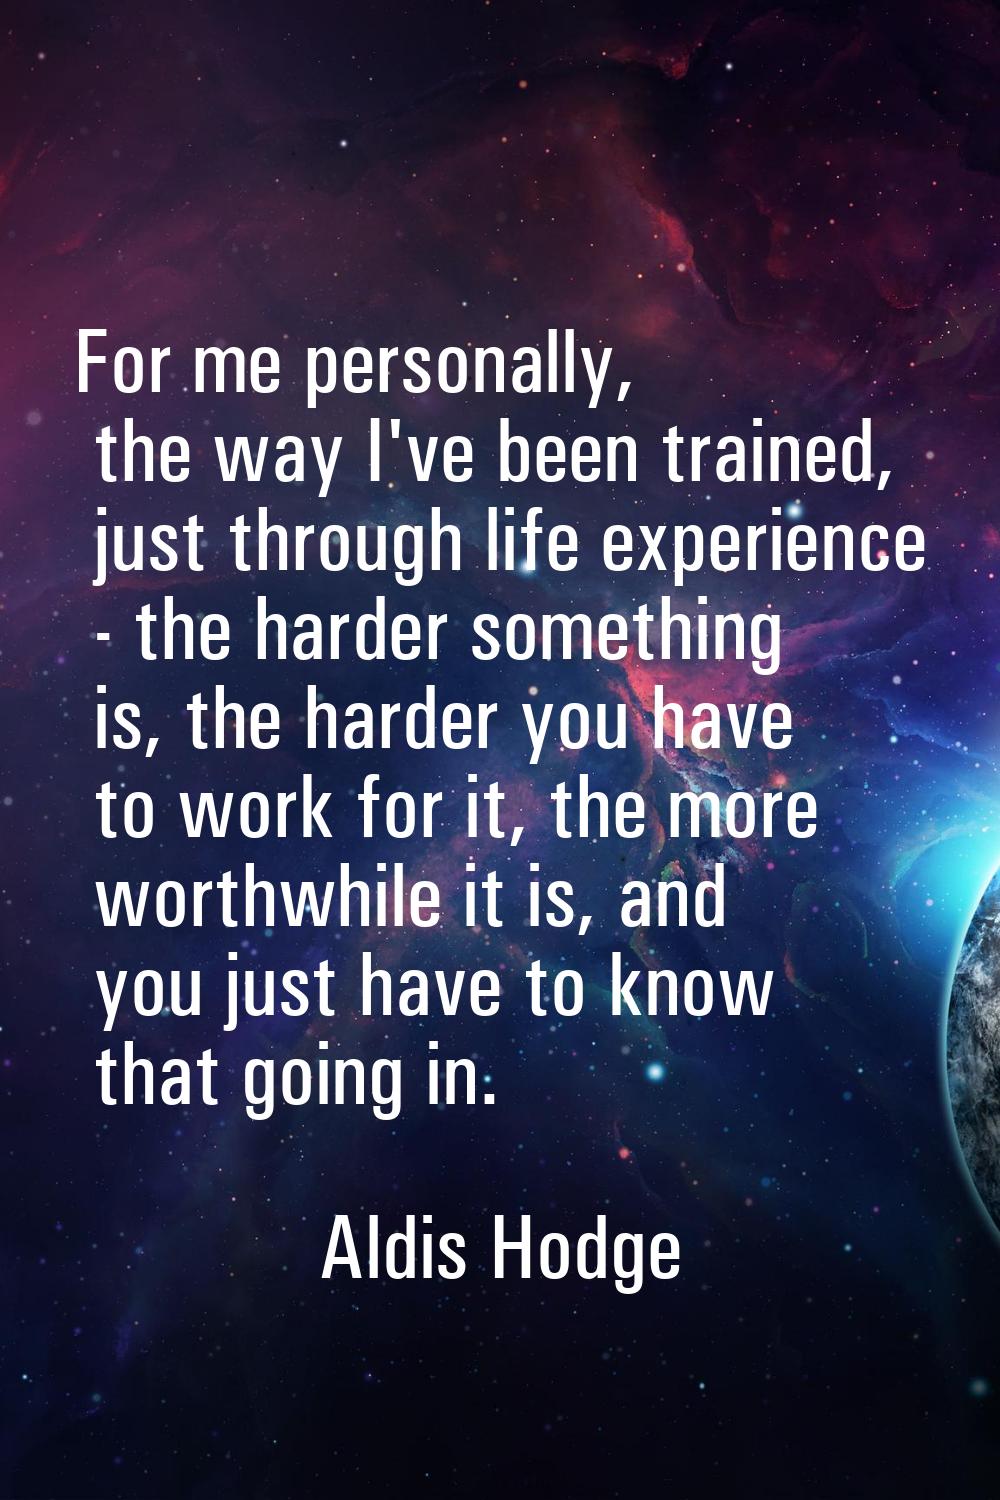 For me personally, the way I've been trained, just through life experience - the harder something i